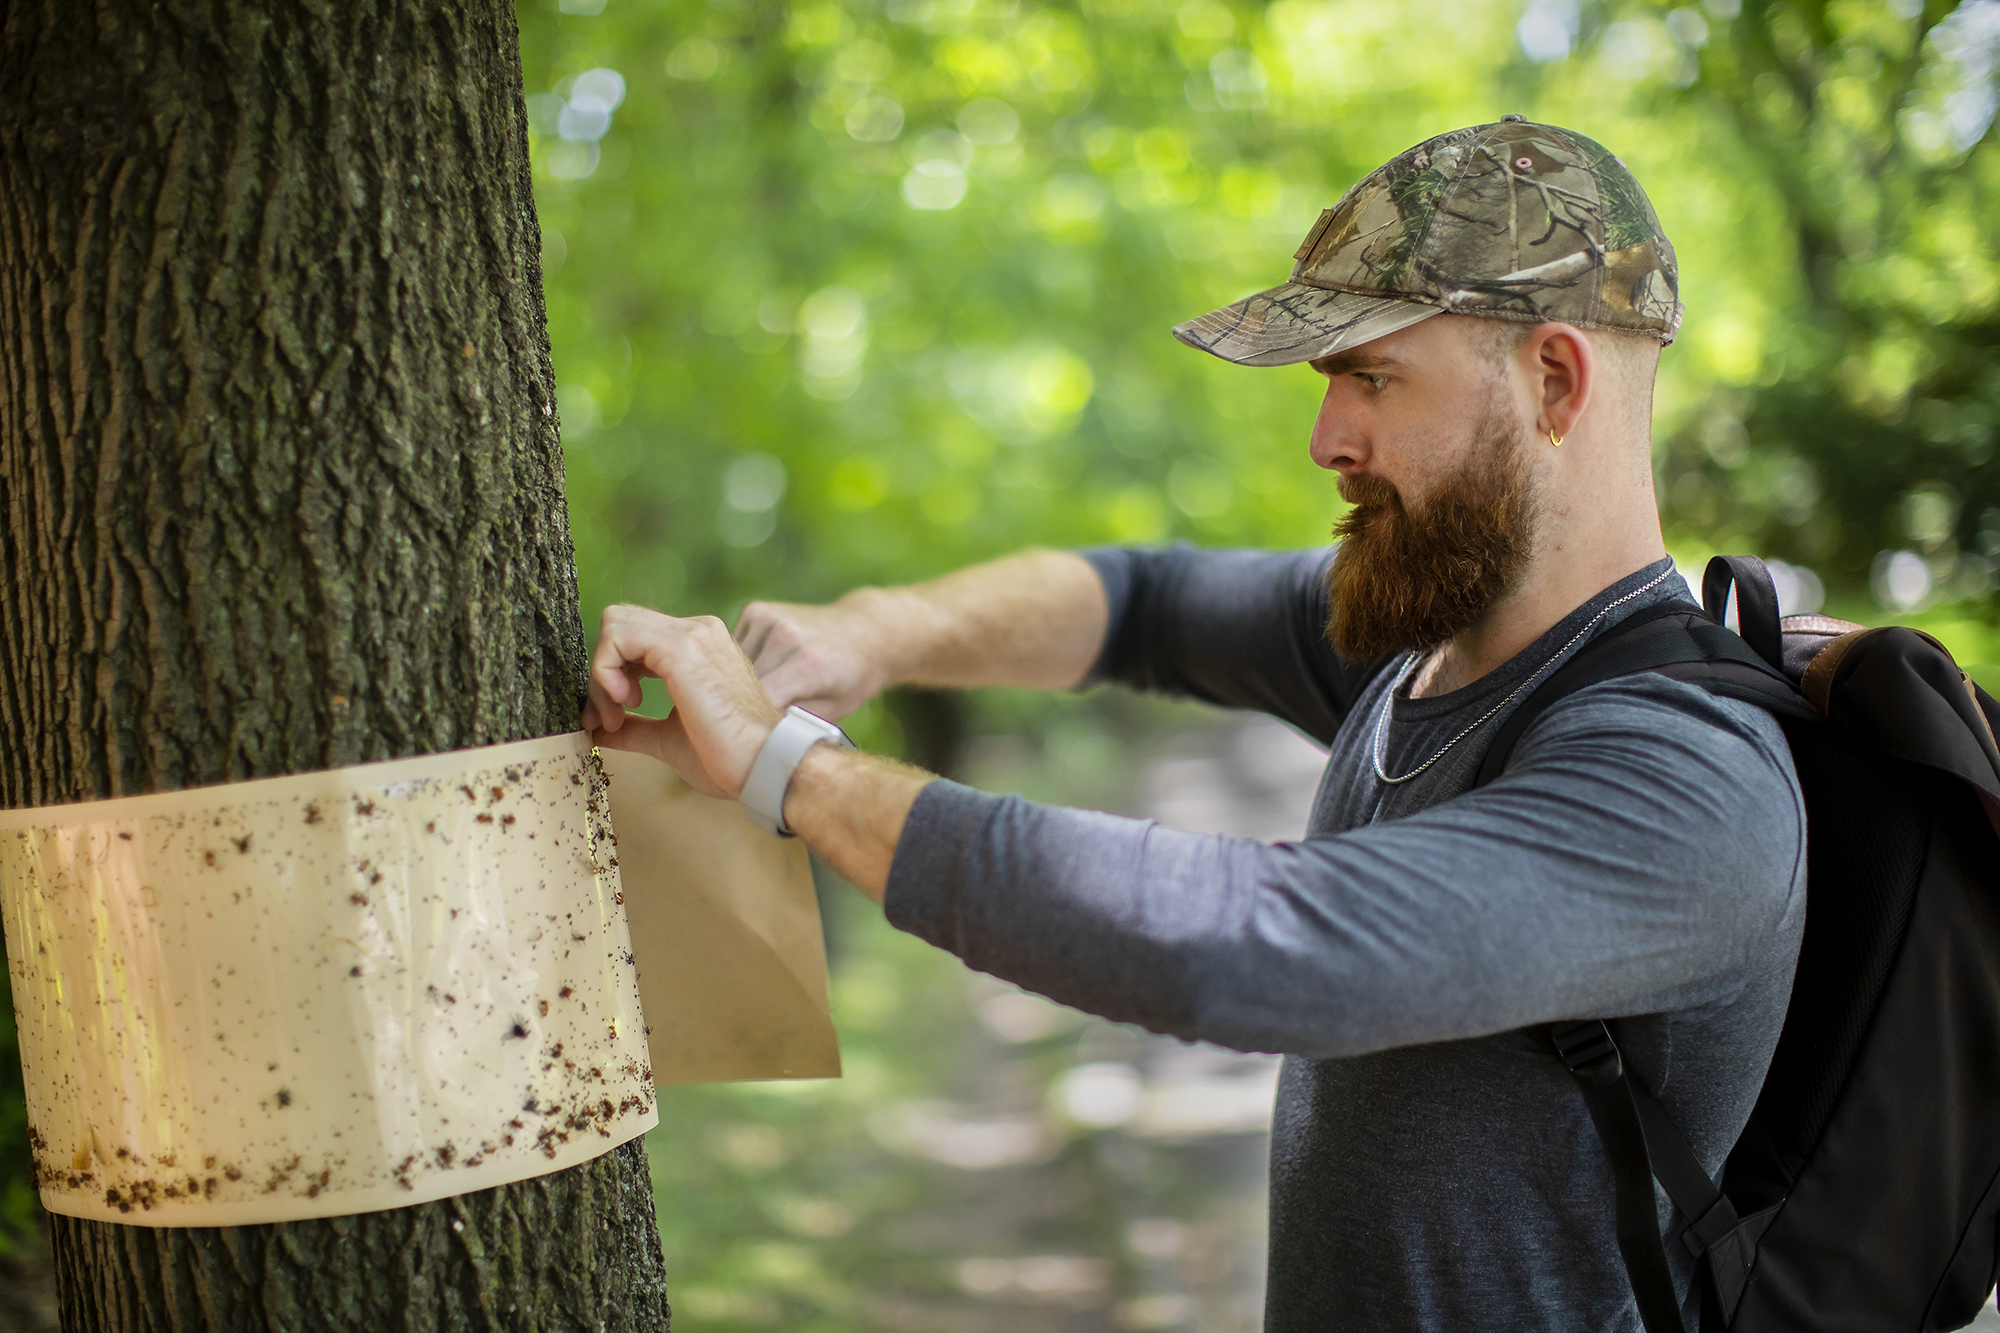 A person removes a sticky band covered with insects from around a tree